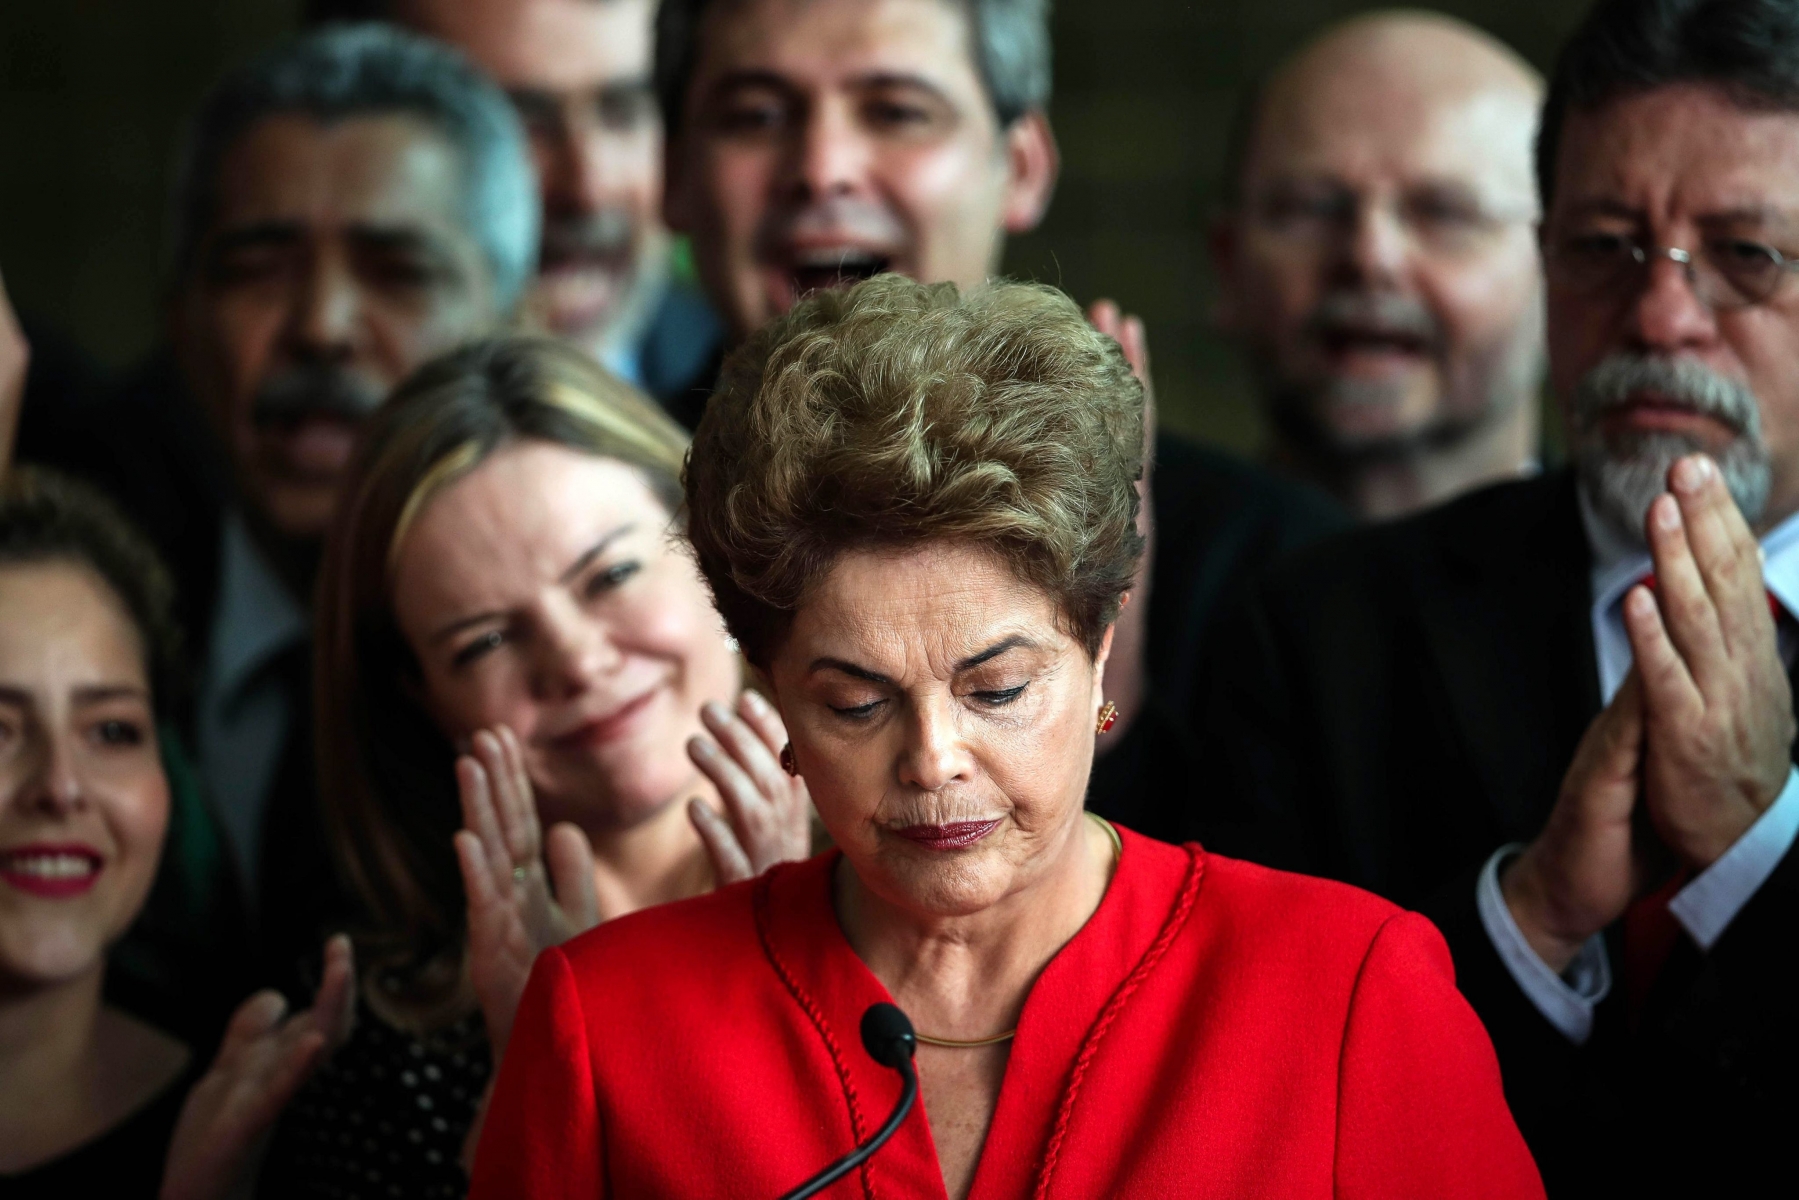 epa05517422 Former Brazilian President, Dilma Rousseff (C) delivers a statement to the press at Alborada Palace, Brasilia, Brazil, 31 August 2016. Brazil's Senate on 31 August 2016 voted to impeach Dilma Rousseff after finding her guilty of manipulating the state budget. Interim President Michel Temer will complete her mandate, which ends on 01 January 2019.  EPA/FERNANDO BIZERRA JR BRAZIL ROUSSEFF IMPEACHMENT